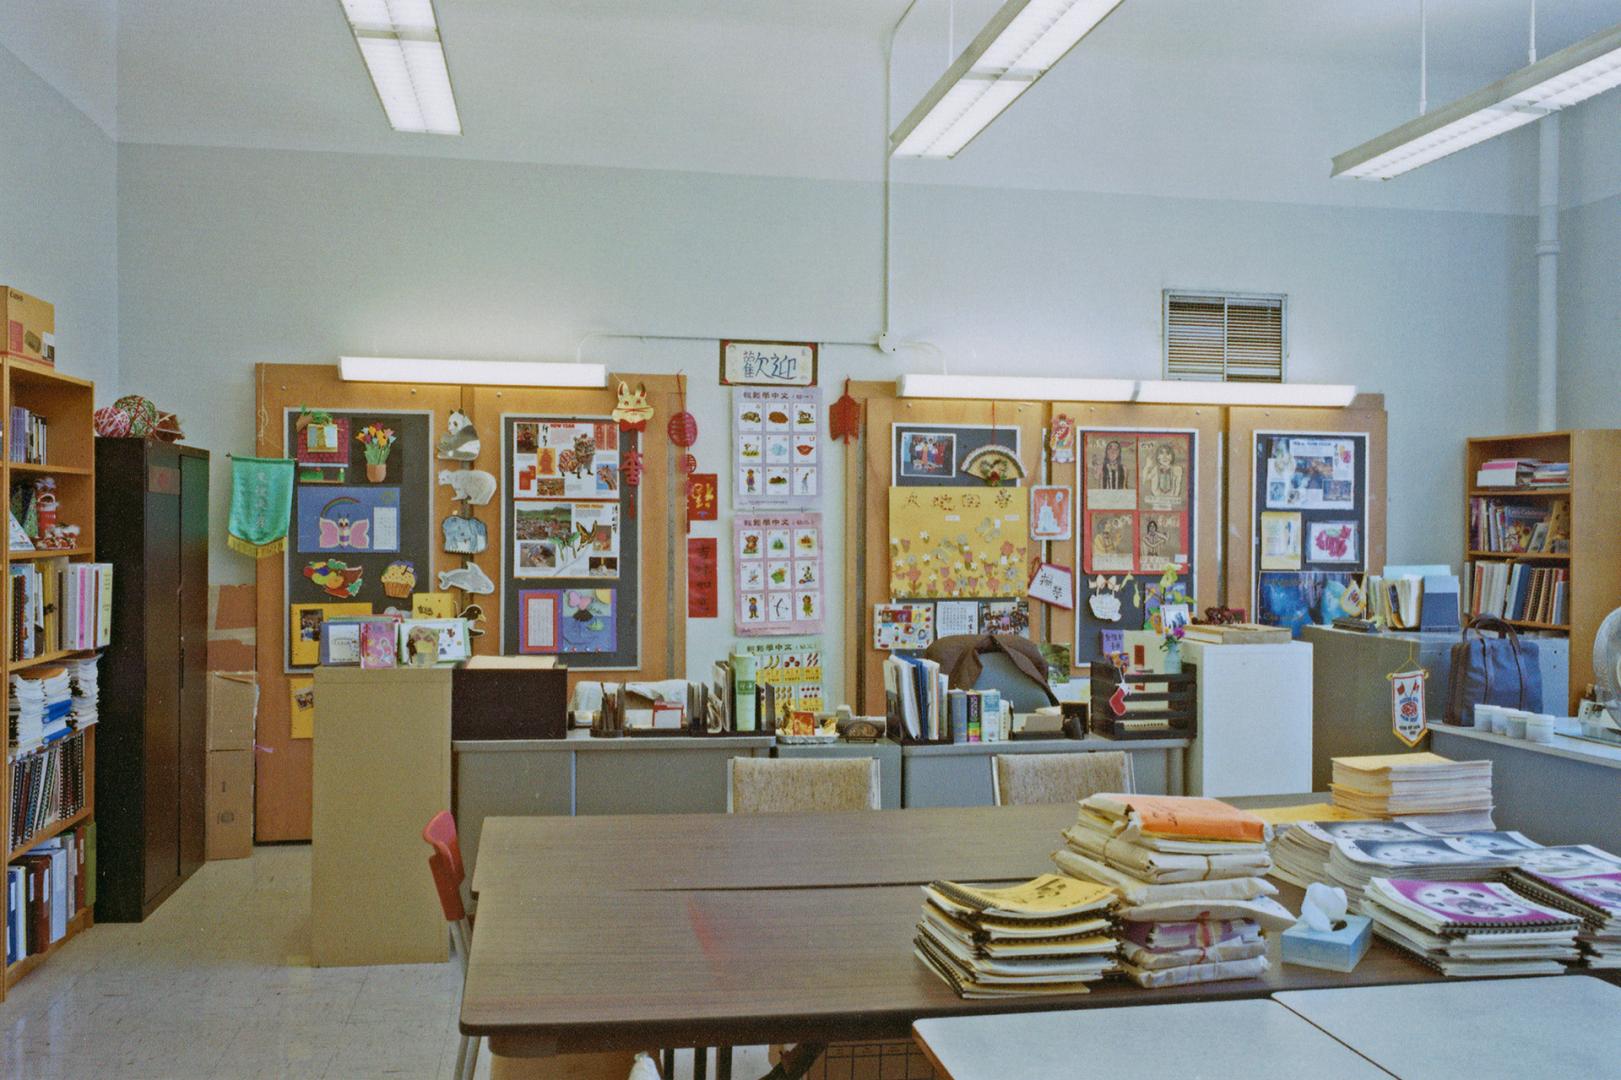 A photograph of a classroom, with desks, chairs, bookshelves and student assignments displayed  ...